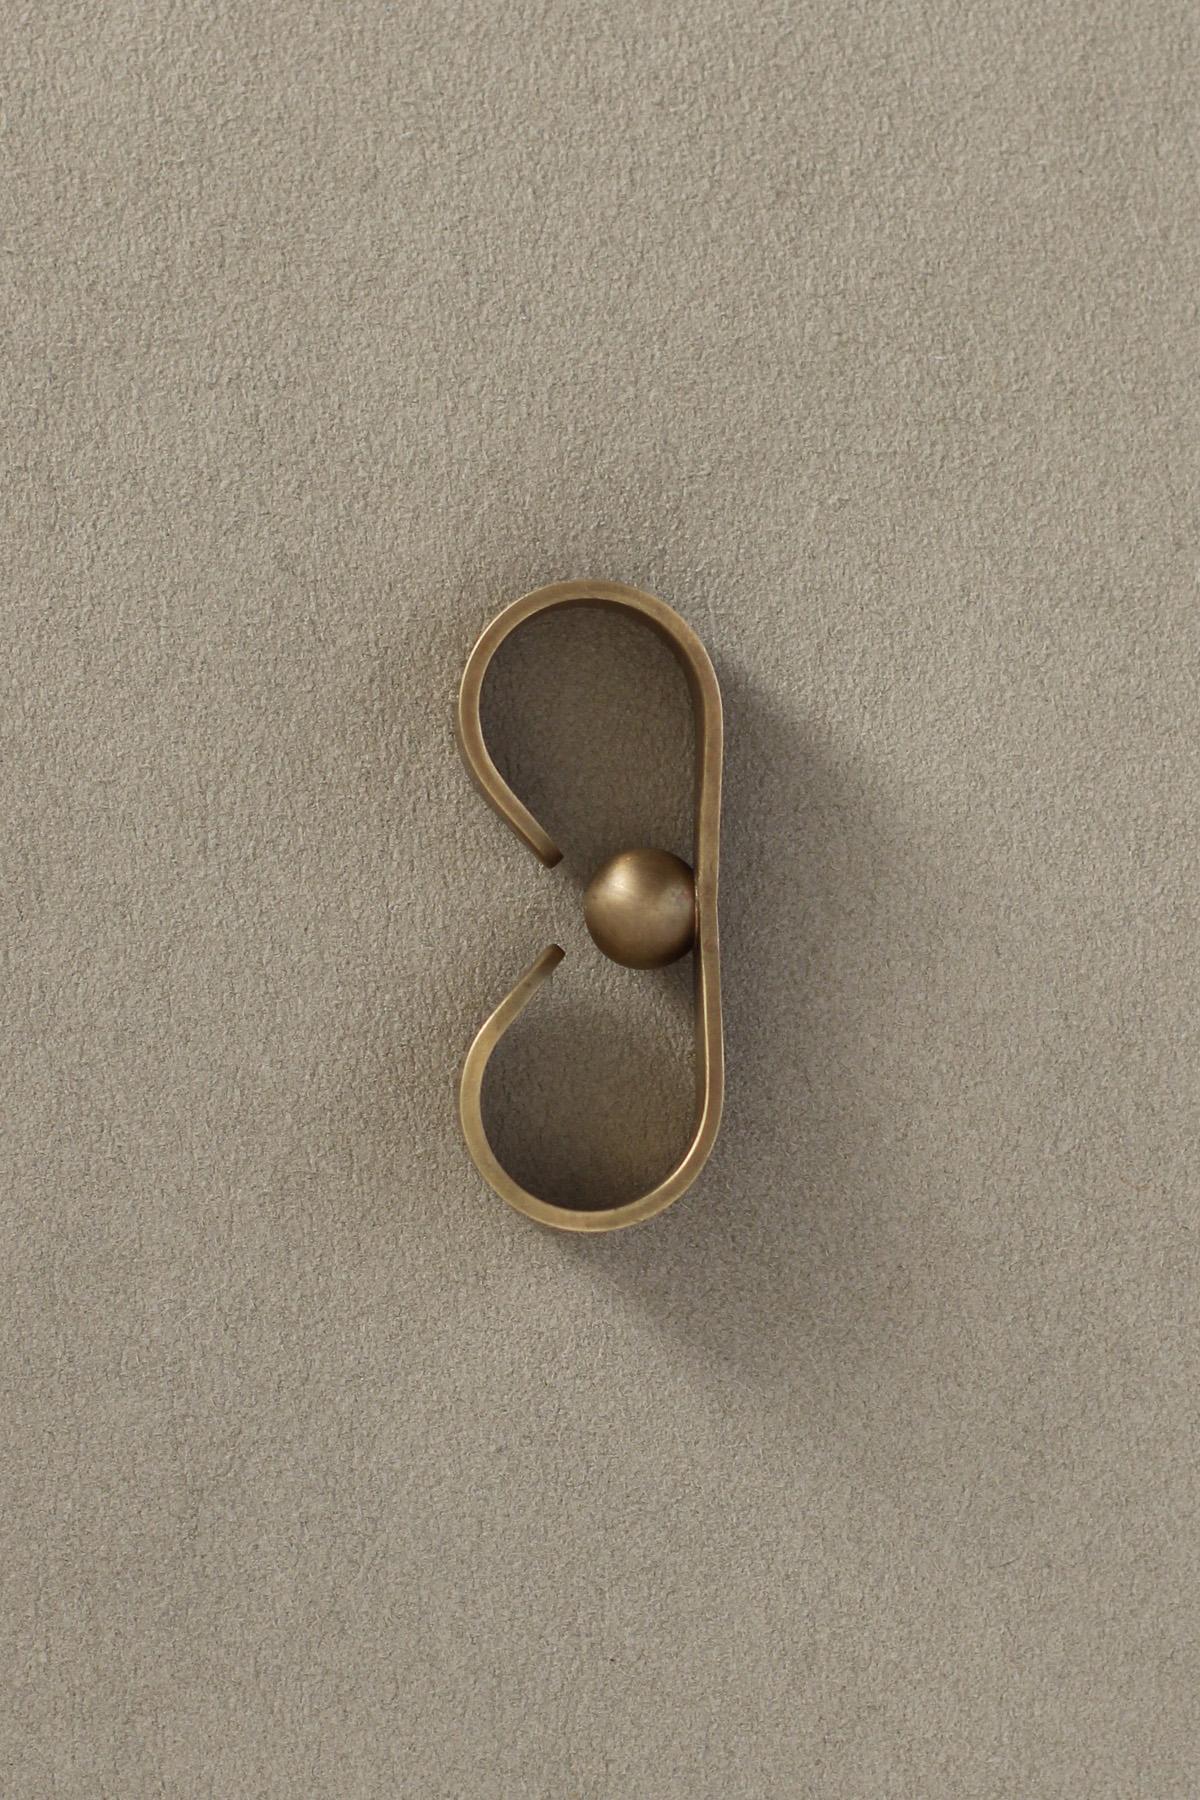 Door Handle or Knob 'Prim' by Spaces Within, Amber Brass

Dimensions
Height: 61 mm
Width: 13 mm
Depth: 25 mm
Weight: 34 g

A delightful piece with lots of character, PRIM expresses a clear signature of joy. The matte finish has a natural looking